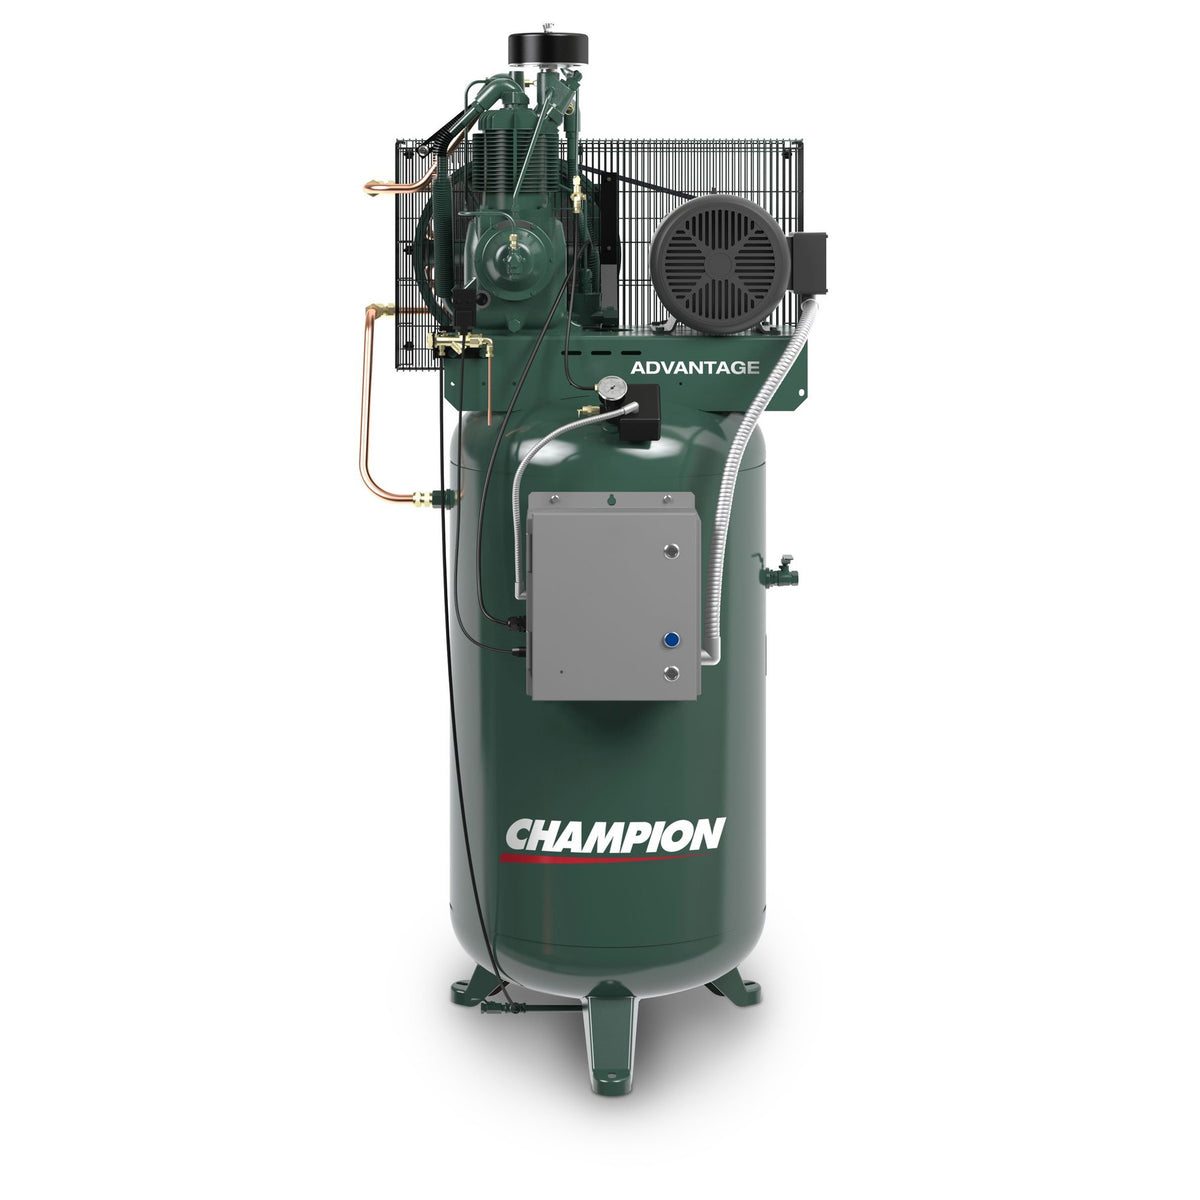 Champion VR5-8 Air Compressor Fully Equipped (230V, 1PH, 5HP, 80GL)